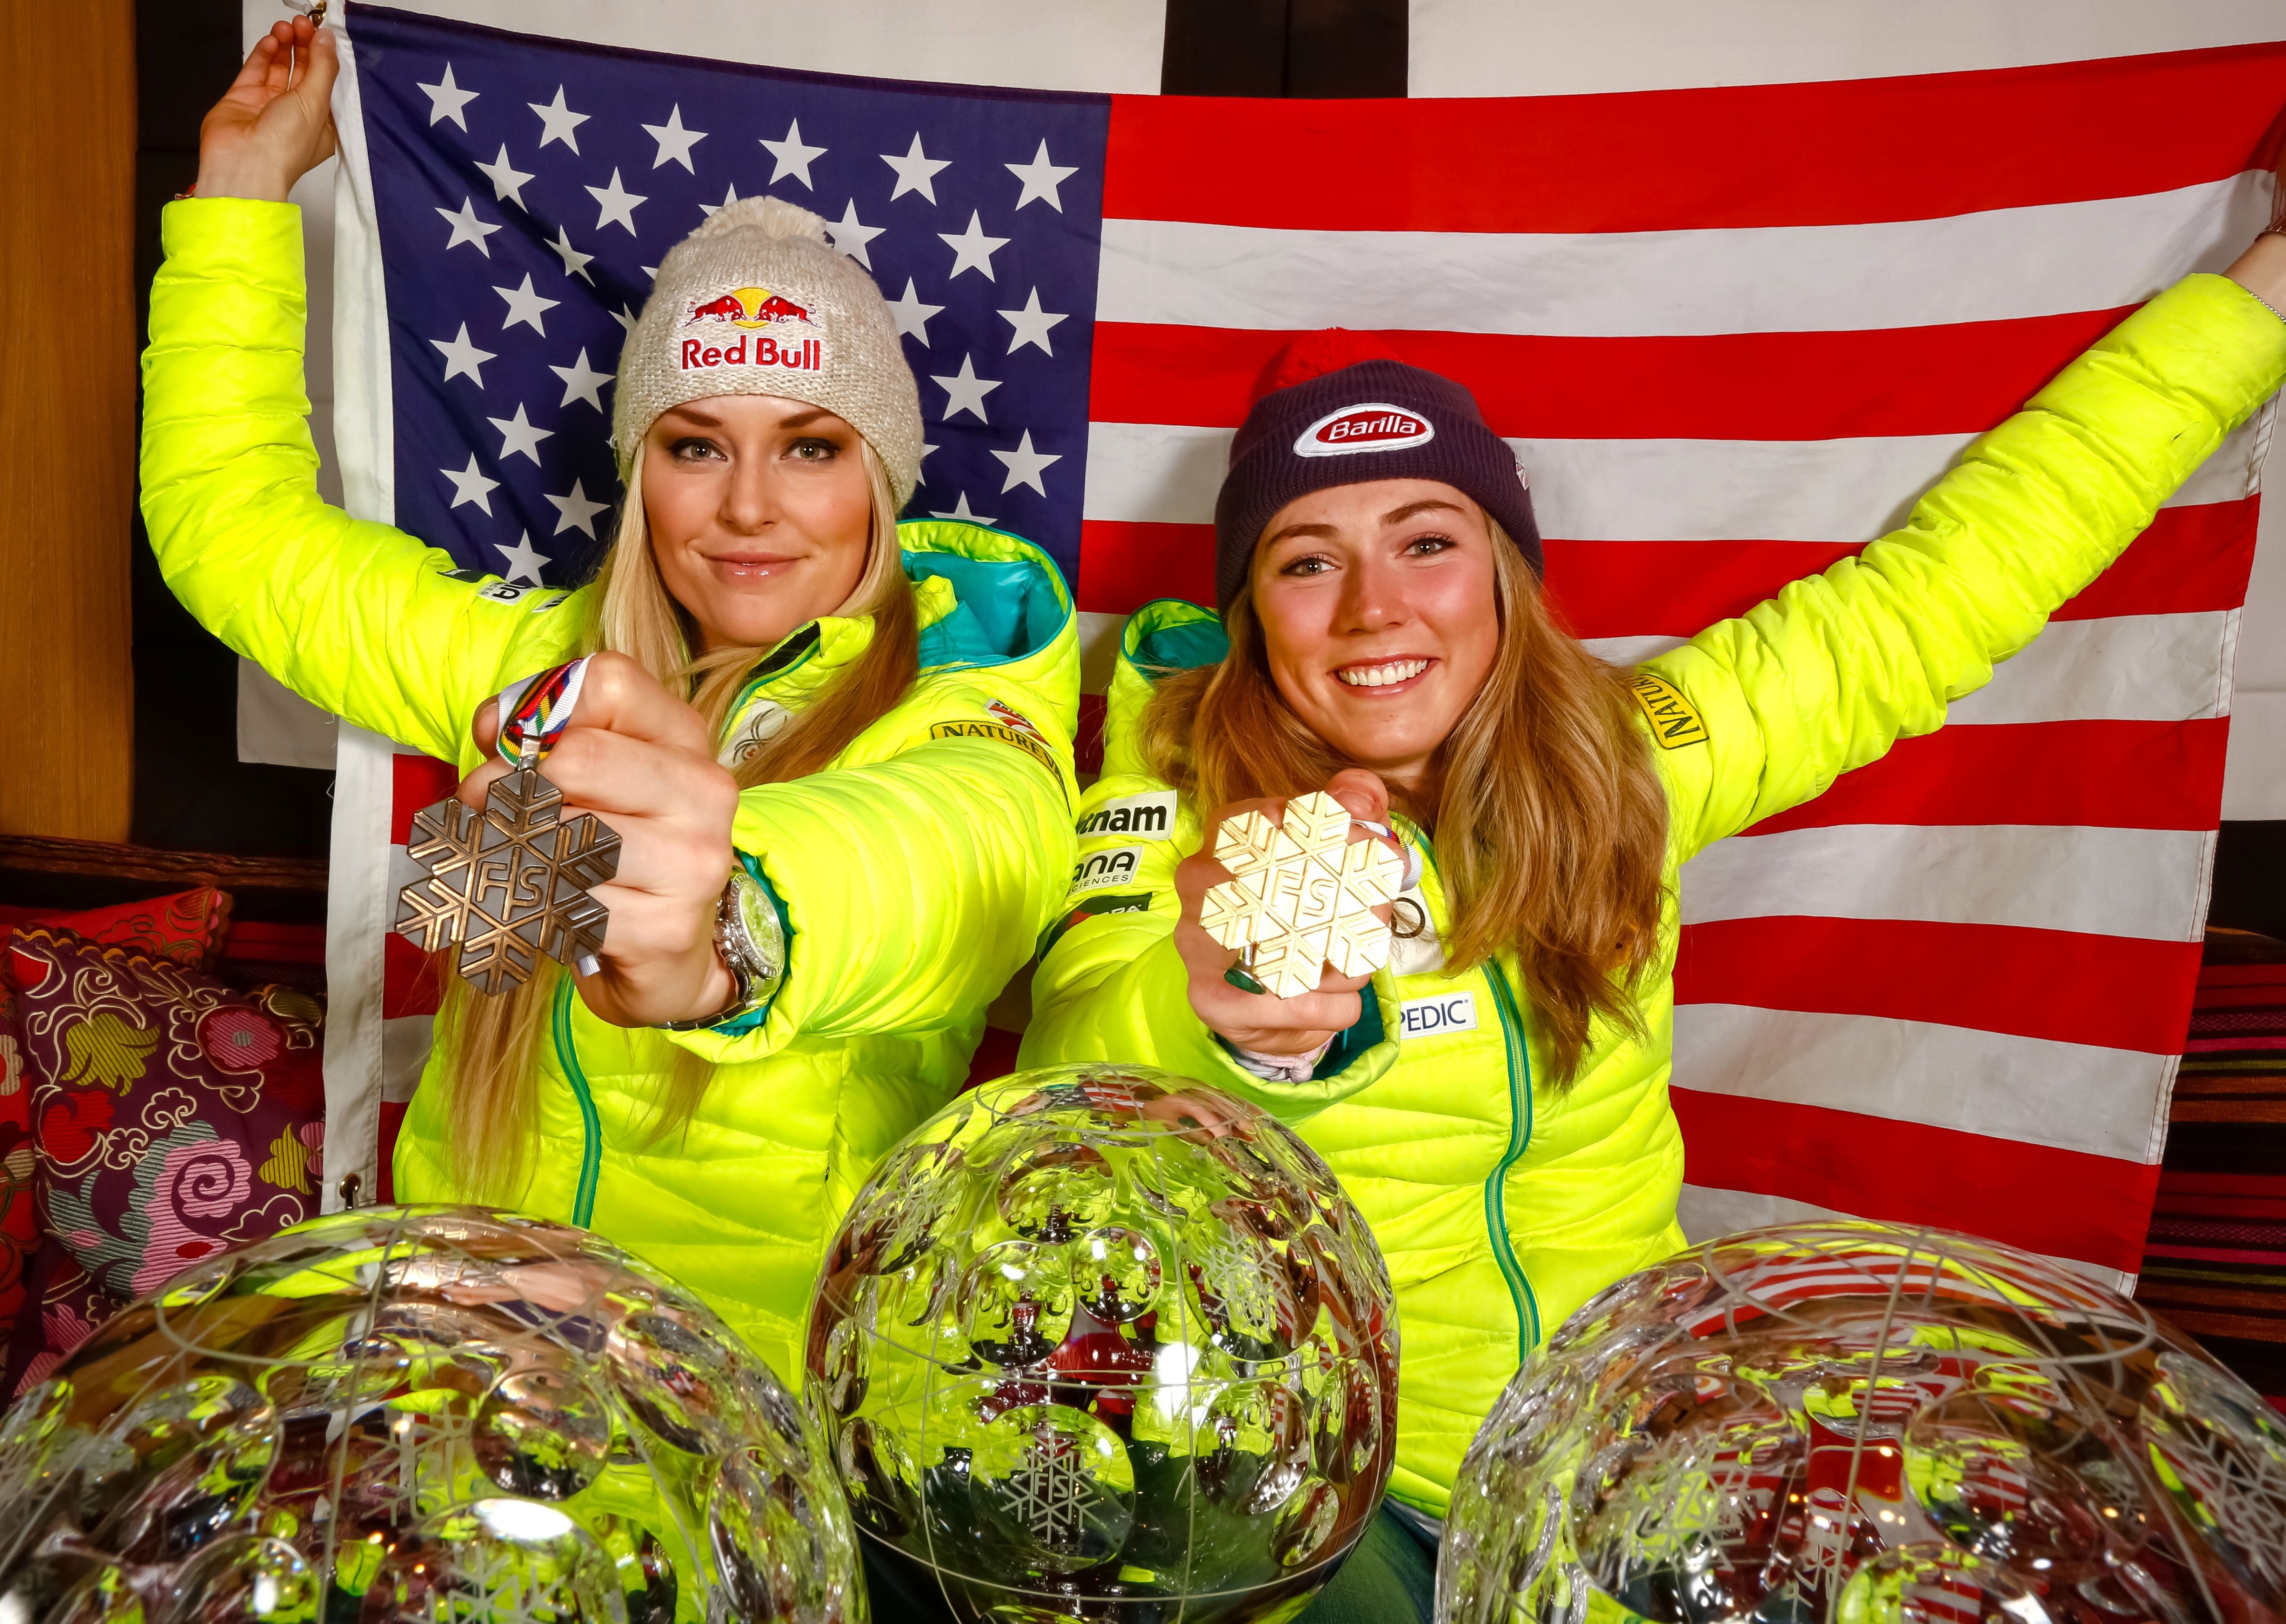 Alpine skiiers and champions Mikaela Shiffrin and Lindsey Vonn pose for a photo shoot on March 22, 2015 in Meribel, France. Alexis Boichard/Agence Zoom—Getty Images. (Alexis Boichard/Agence Zoom—Getty Images.)